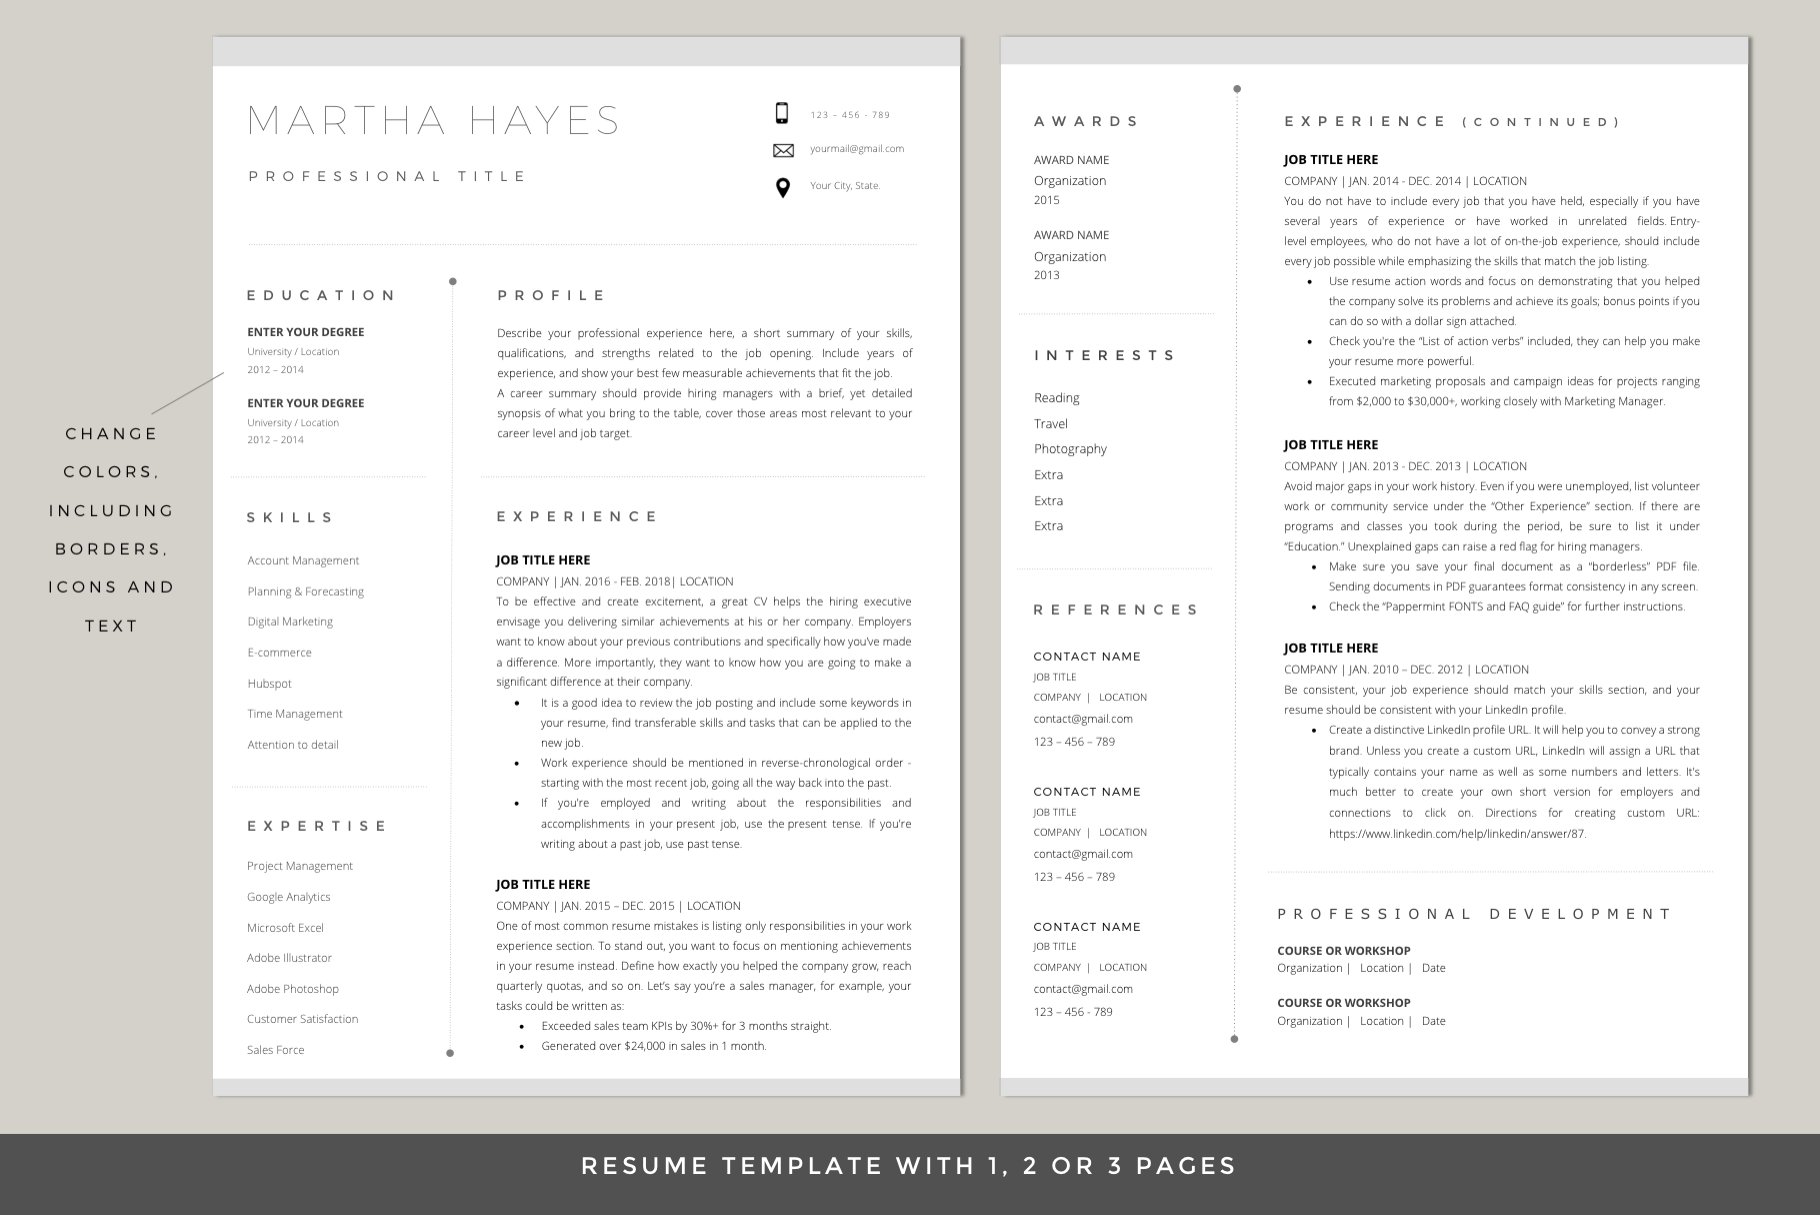 Word Resume & Cover Letter Template preview image.